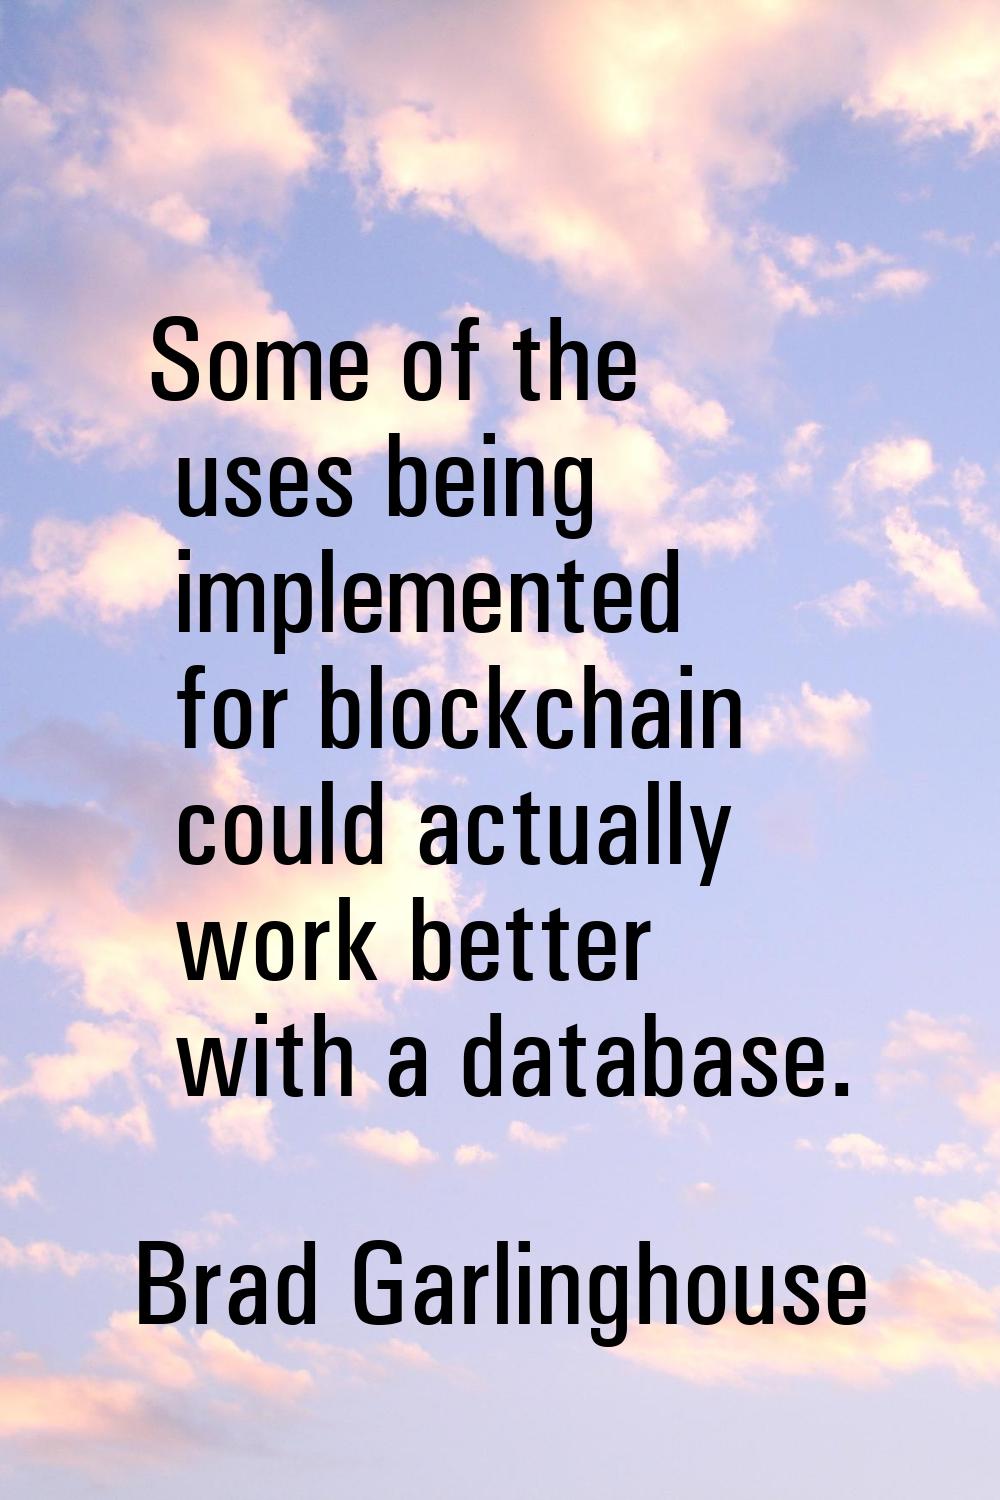 Some of the uses being implemented for blockchain could actually work better with a database.